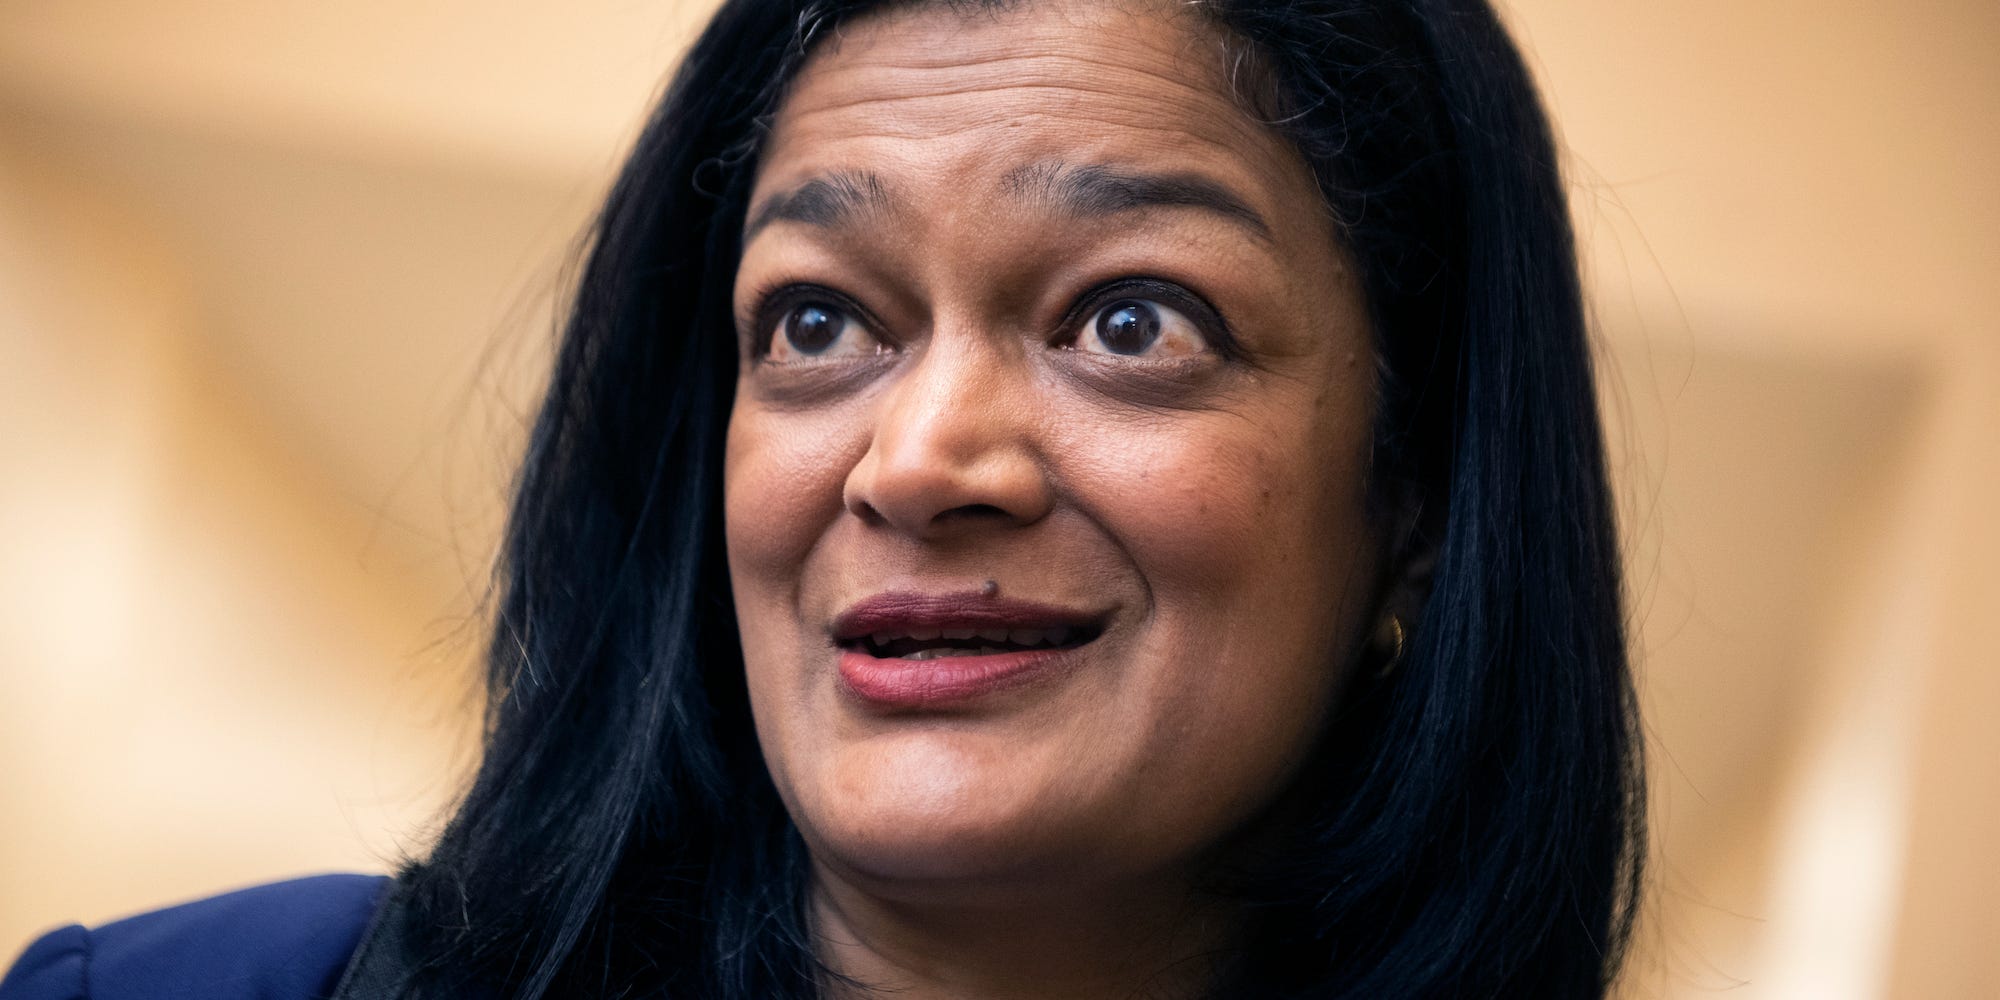 UNITED STATES - MARCH 3: Rep. Pramila Jayapal, D-Wash., talks with reporters after a meeting of the House Democratic Caucus in the Capitol on Tuesday, March 3, 2020. (Photo By Tom Williams/CQ-Roll Call, Inc via Getty Images)